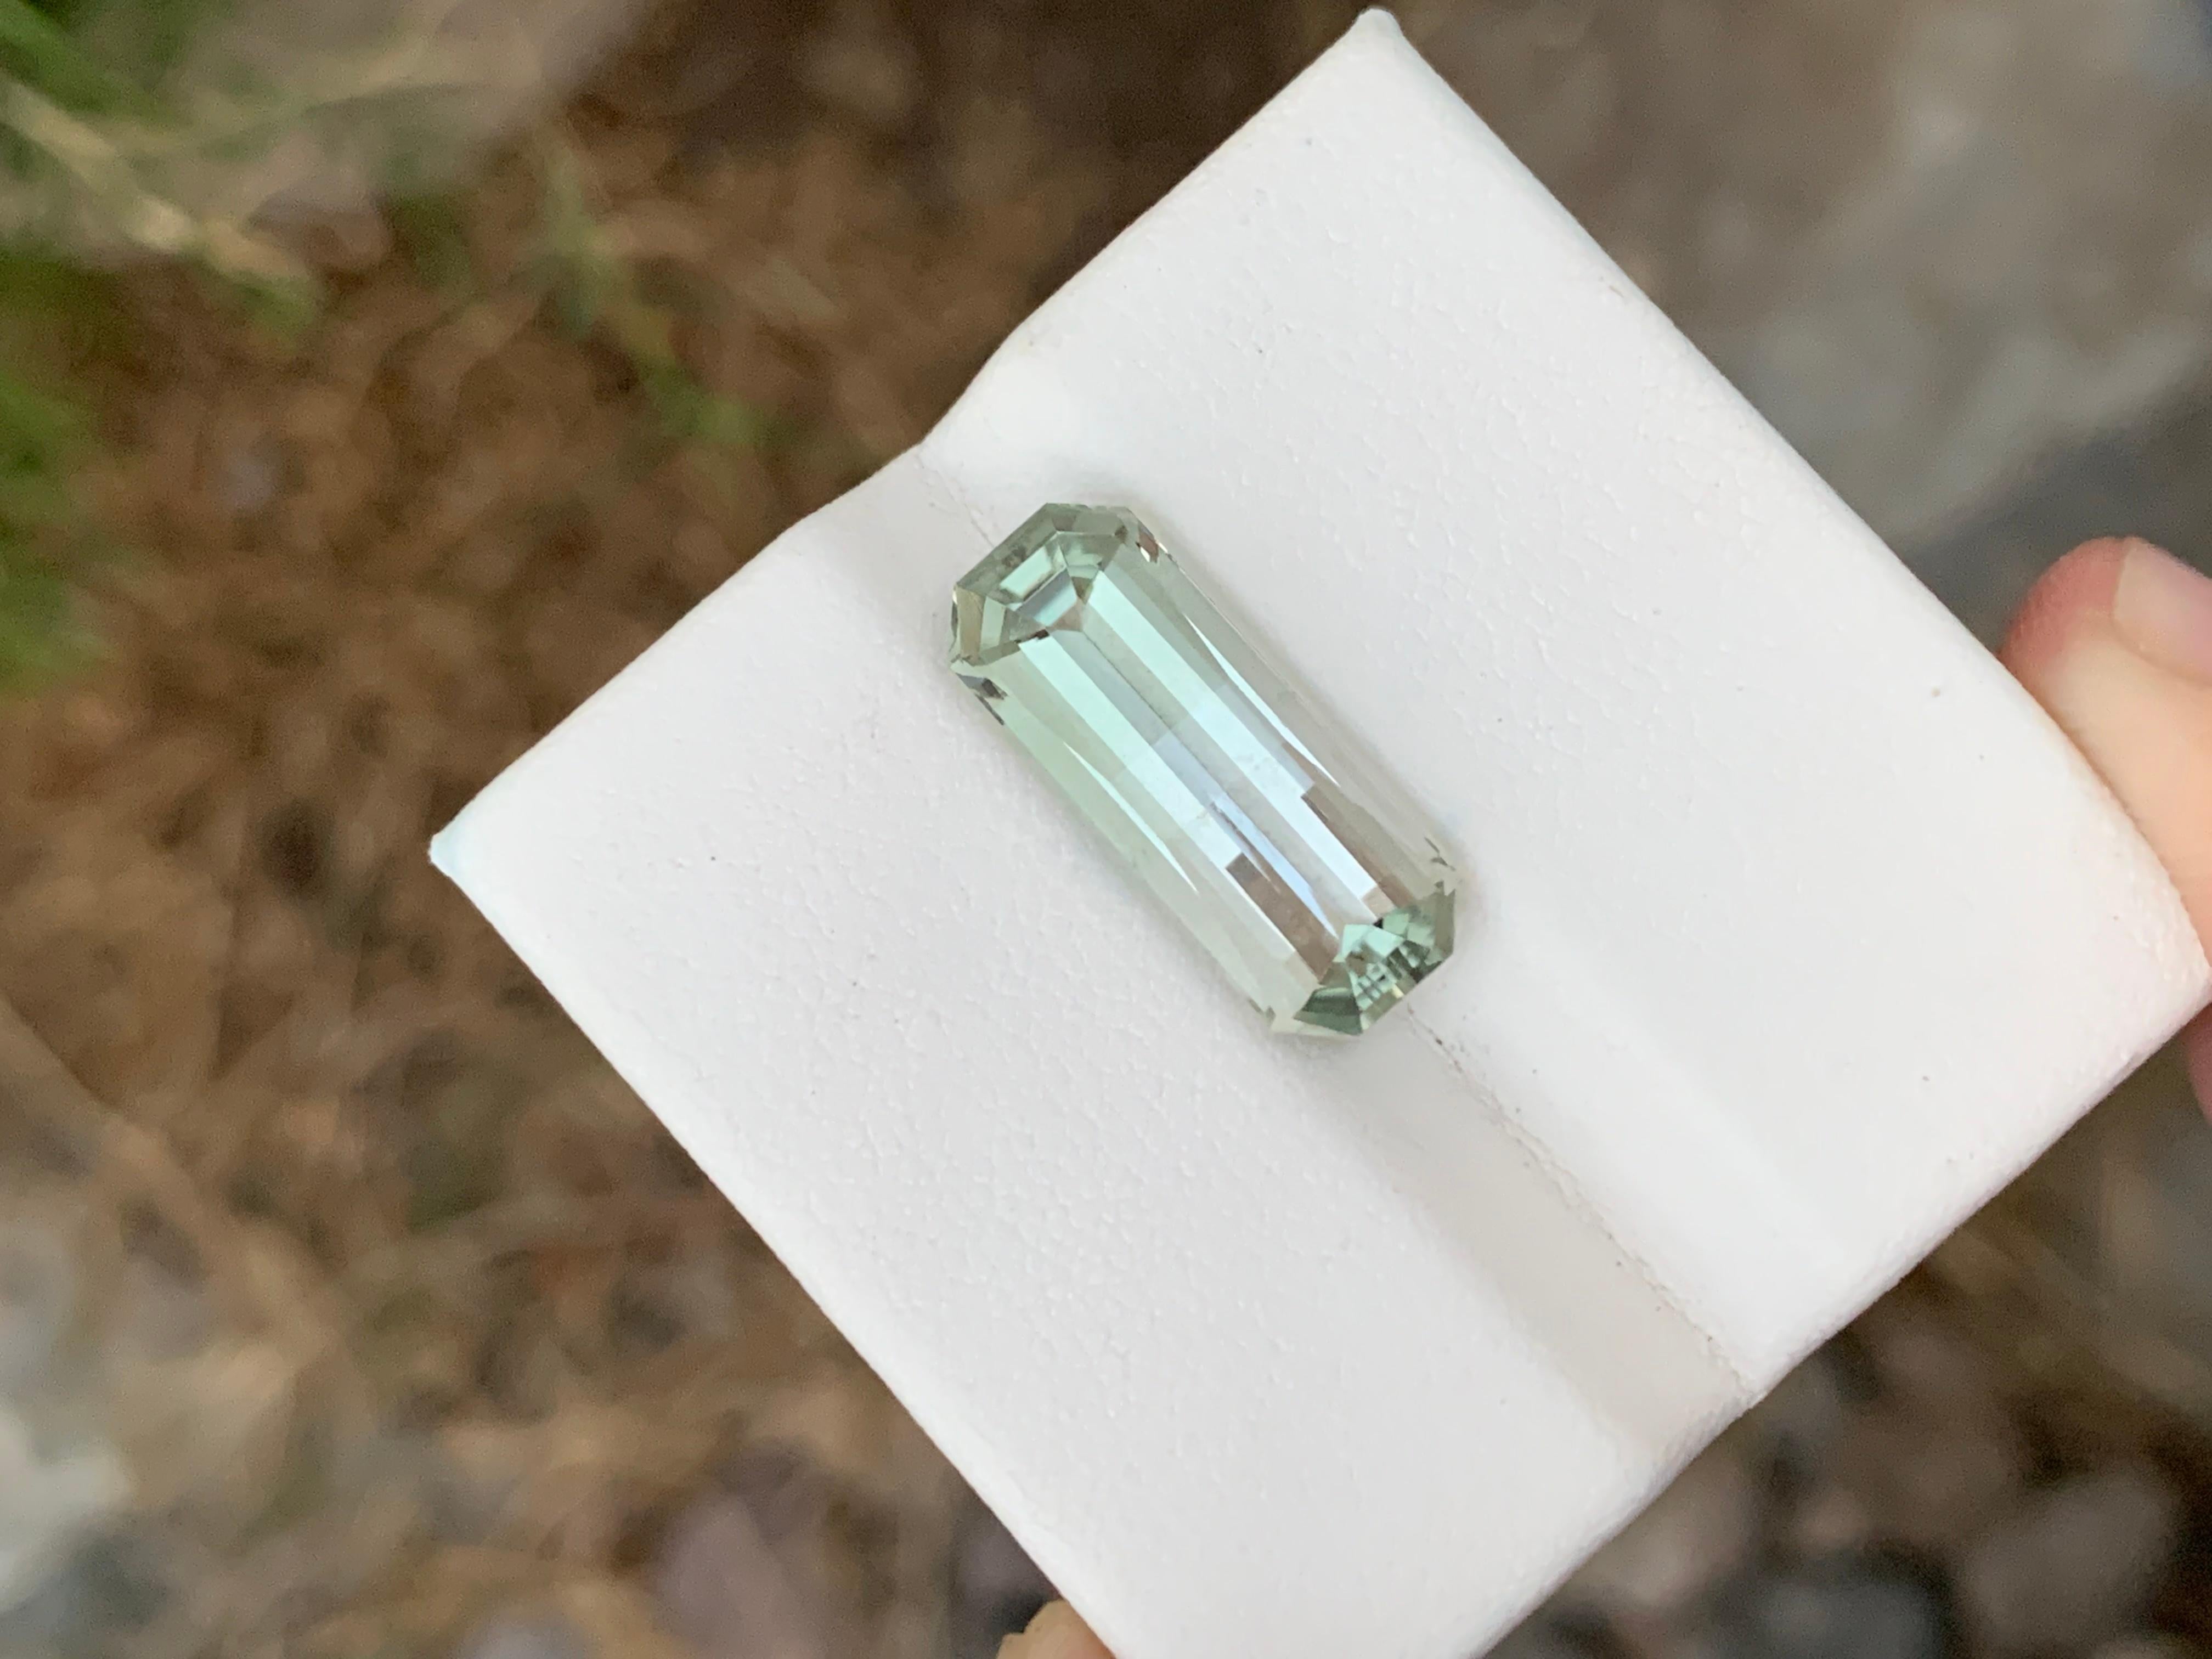 Faceted Amethyst 
Weight: 7.05 Carats 
Dimension: 19.5x7.7x6.5 Mm
Origin: Brazil
Color: Green
Shape: Emerald 
Cut/Facet: Pixel Cut / Smith Bar Cut
Certificate: On Customer Demand 
Green amethyst, also known as prasiolite, is a captivating gemstone